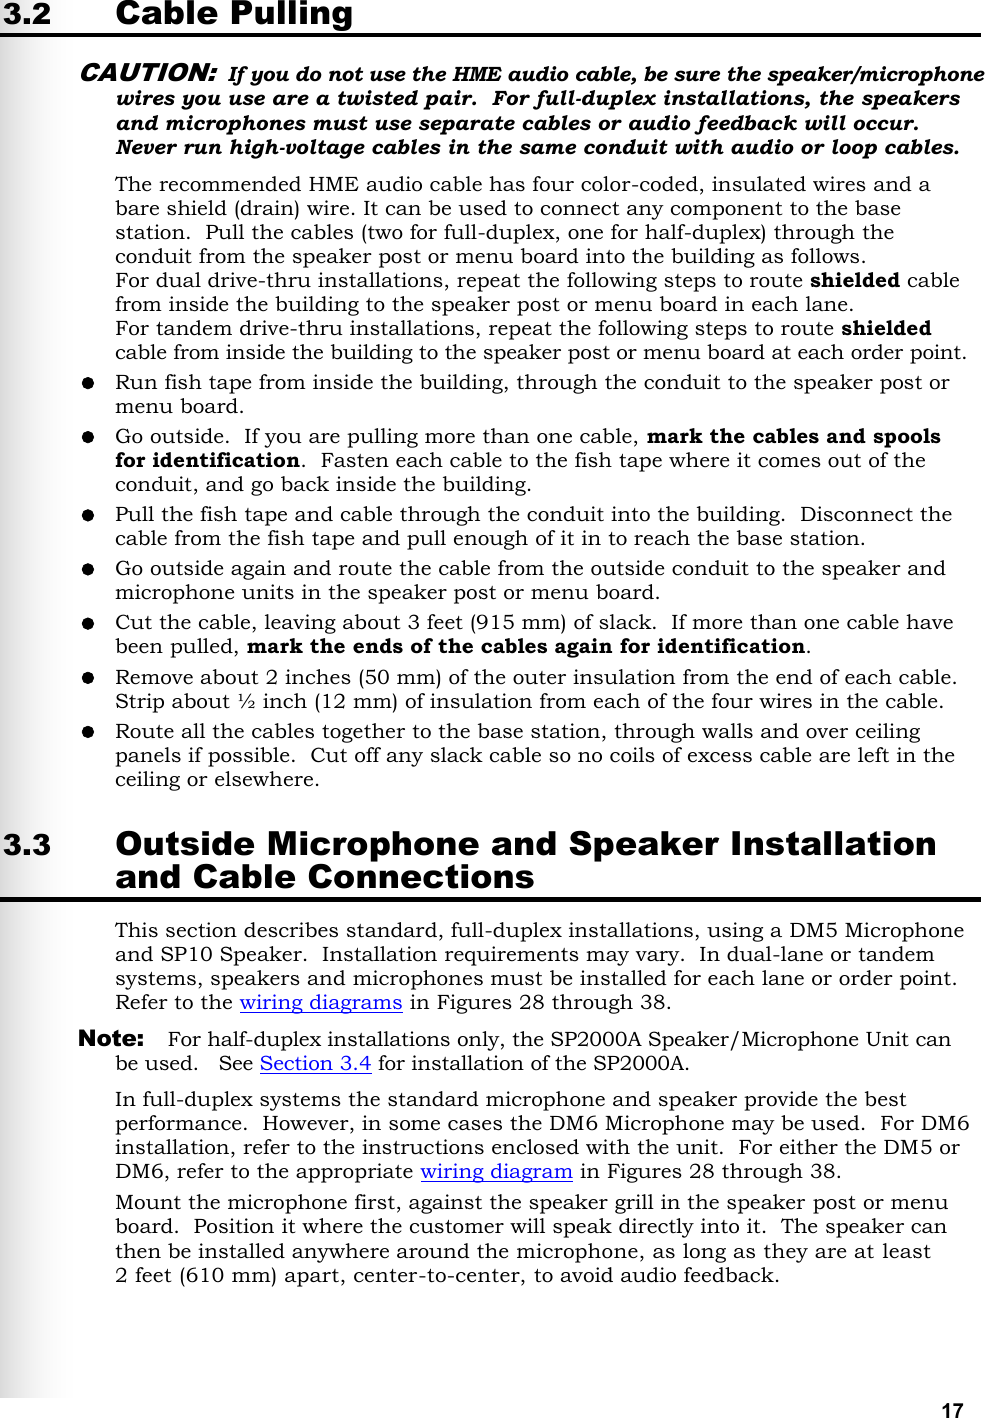   17 3.2 Cable Pulling CAUTION: If you do not use the HME audio cable, be sure the speaker/microphone wires you use are a twisted pair.  For full-duplex installations, the speakers and microphones must use separate cables or audio feedback will occur. Never run high-voltage cables in the same conduit with audio or loop cables. The recommended HME audio cable has four color-coded, insulated wires and a bare shield (drain) wire. It can be used to connect any component to the base station.  Pull the cables (two for full-duplex, one for half-duplex) through the conduit from the speaker post or menu board into the building as follows. For dual drive-thru installations, repeat the following steps to route shielded cable from inside the building to the speaker post or menu board in each lane. For tandem drive-thru installations, repeat the following steps to route shielded cable from inside the building to the speaker post or menu board at each order point.  Run fish tape from inside the building, through the conduit to the speaker post or menu board.   Go outside.  If you are pulling more than one cable, mark the cables and spools for identification.  Fasten each cable to the fish tape where it comes out of the conduit, and go back inside the building.   Pull the fish tape and cable through the conduit into the building.  Disconnect the cable from the fish tape and pull enough of it in to reach the base station.   Go outside again and route the cable from the outside conduit to the speaker and microphone units in the speaker post or menu board.    Cut the cable, leaving about 3 feet (915 mm) of slack.  If more than one cable have been pulled, mark the ends of the cables again for identification.  Remove about 2 inches (50 mm) of the outer insulation from the end of each cable.  Strip about ½ inch (12 mm) of insulation from each of the four wires in the cable.  Route all the cables together to the base station, through walls and over ceiling panels if possible.  Cut off any slack cable so no coils of excess cable are left in the ceiling or elsewhere. 3.3 Outside Microphone and Speaker Installation and Cable Connections This section describes standard, full-duplex installations, using a DM5 Microphone and SP10 Speaker.  Installation requirements may vary.  In dual-lane or tandem systems, speakers and microphones must be installed for each lane or order point.  Refer to the wiring diagrams in Figures 28 through 38.  Note:  For half-duplex installations only, the SP2000A Speaker/Microphone Unit can be used.   See Section 3.4 for installation of the SP2000A. In full-duplex systems the standard microphone and speaker provide the best performance.  However, in some cases the DM6 Microphone may be used.  For DM6 installation, refer to the instructions enclosed with the unit.  For either the DM5 or DM6, refer to the appropriate wiring diagram in Figures 28 through 38.  Mount the microphone first, against the speaker grill in the speaker post or menu board.  Position it where the customer will speak directly into it.  The speaker can then be installed anywhere around the microphone, as long as they are at least  2 feet (610 mm) apart, center-to-center, to avoid audio feedback. 